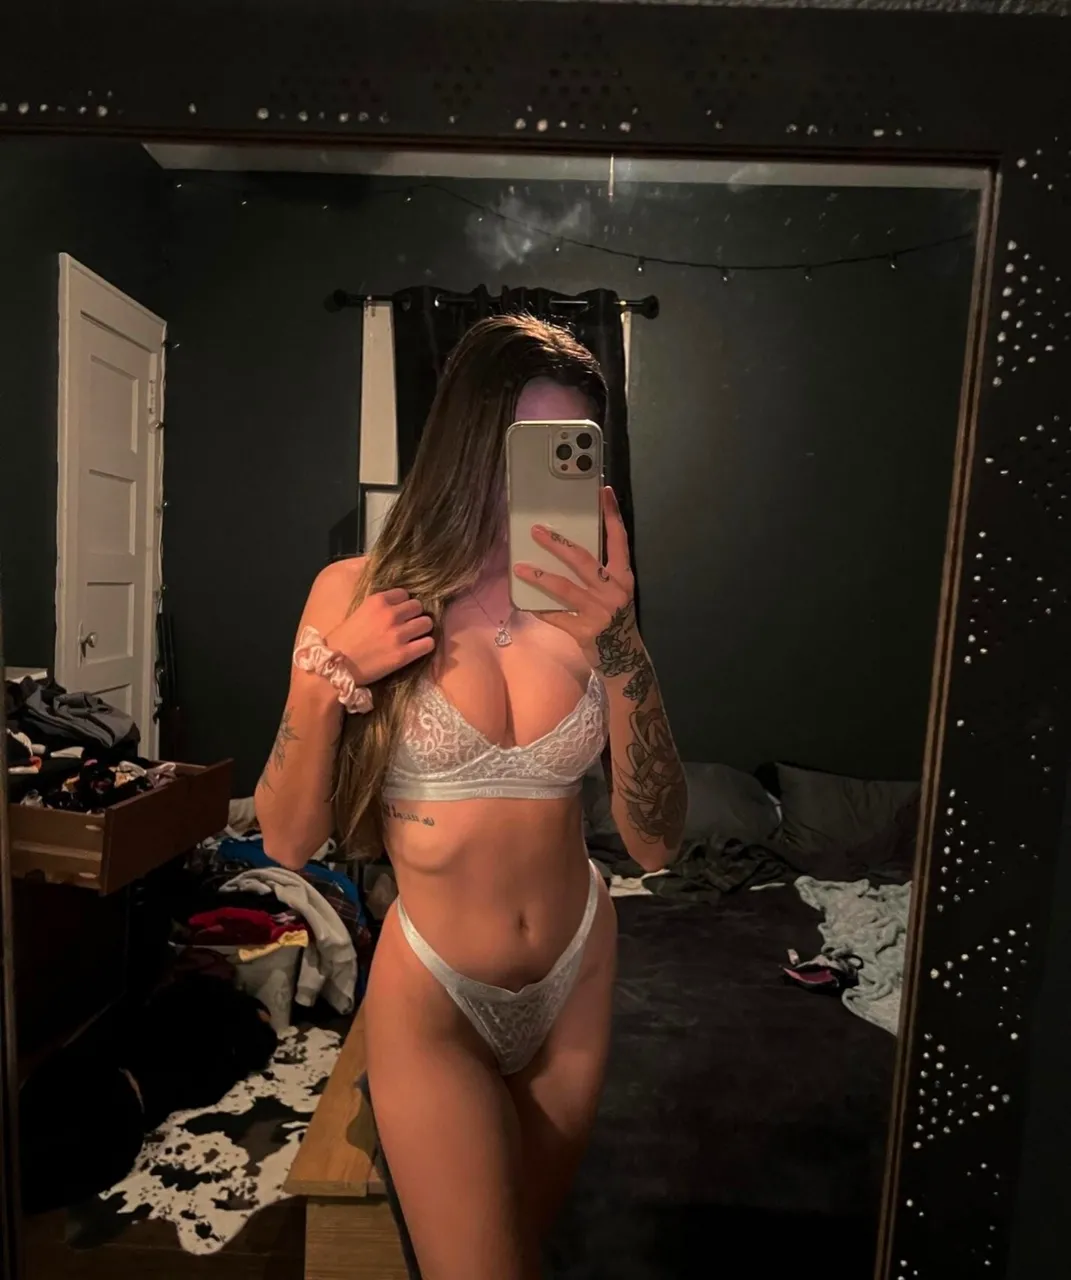 Escorts Scranton, Pennsylvania iM NEW JUICY, HOT🔥CREAMY 💦SEXY AND AVAILABLE TO SATISFY 🍆YOU COMPLETELY👅